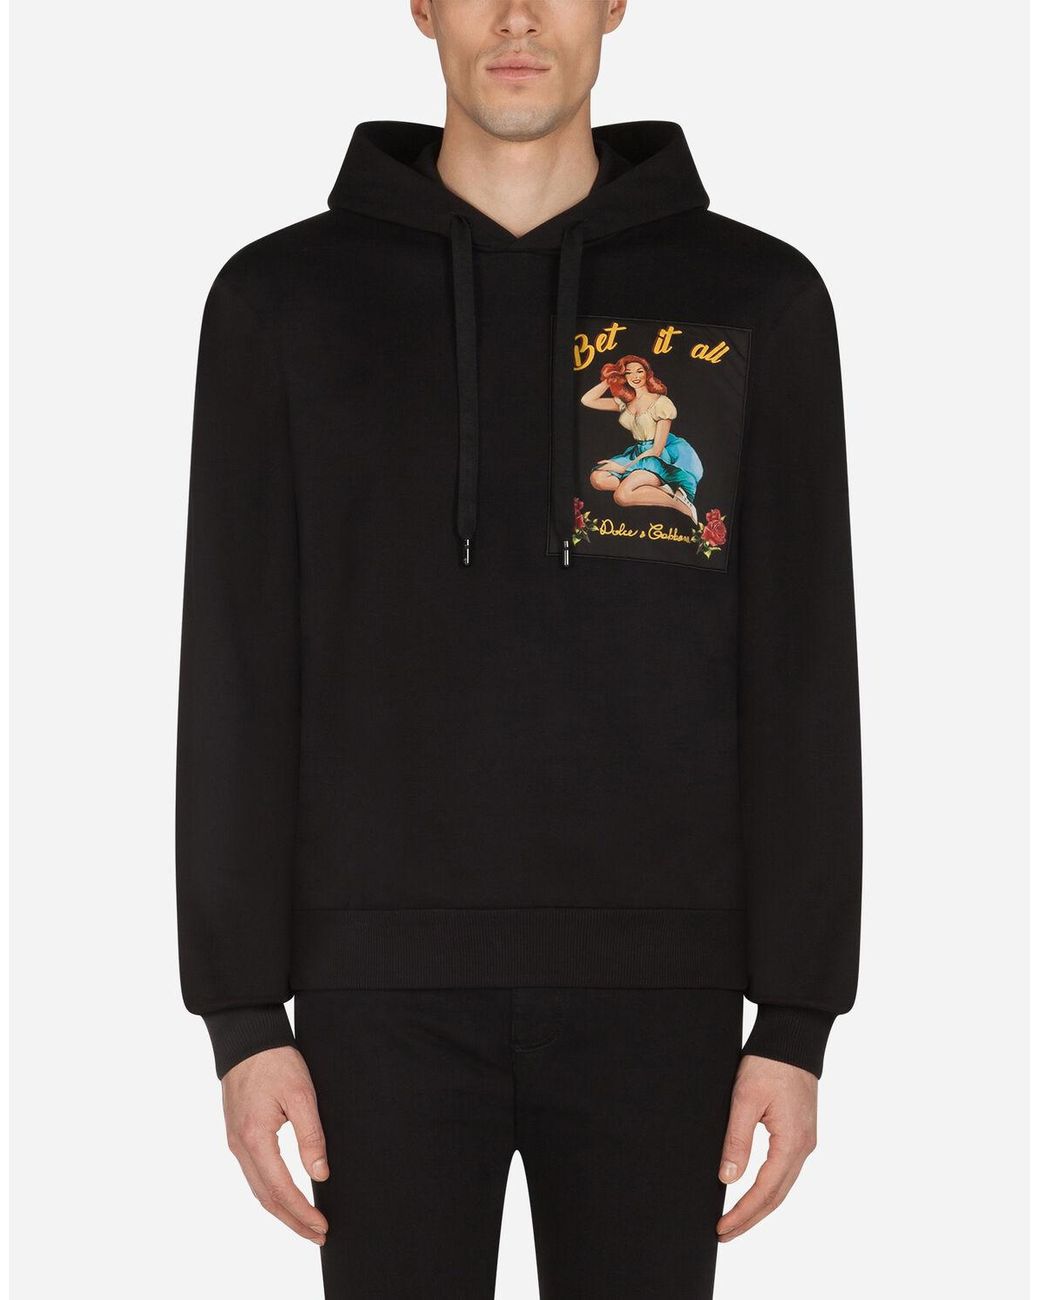 Dolce & Gabbana Cotton Jersey Hoodie With Patch in Black for Men - Lyst